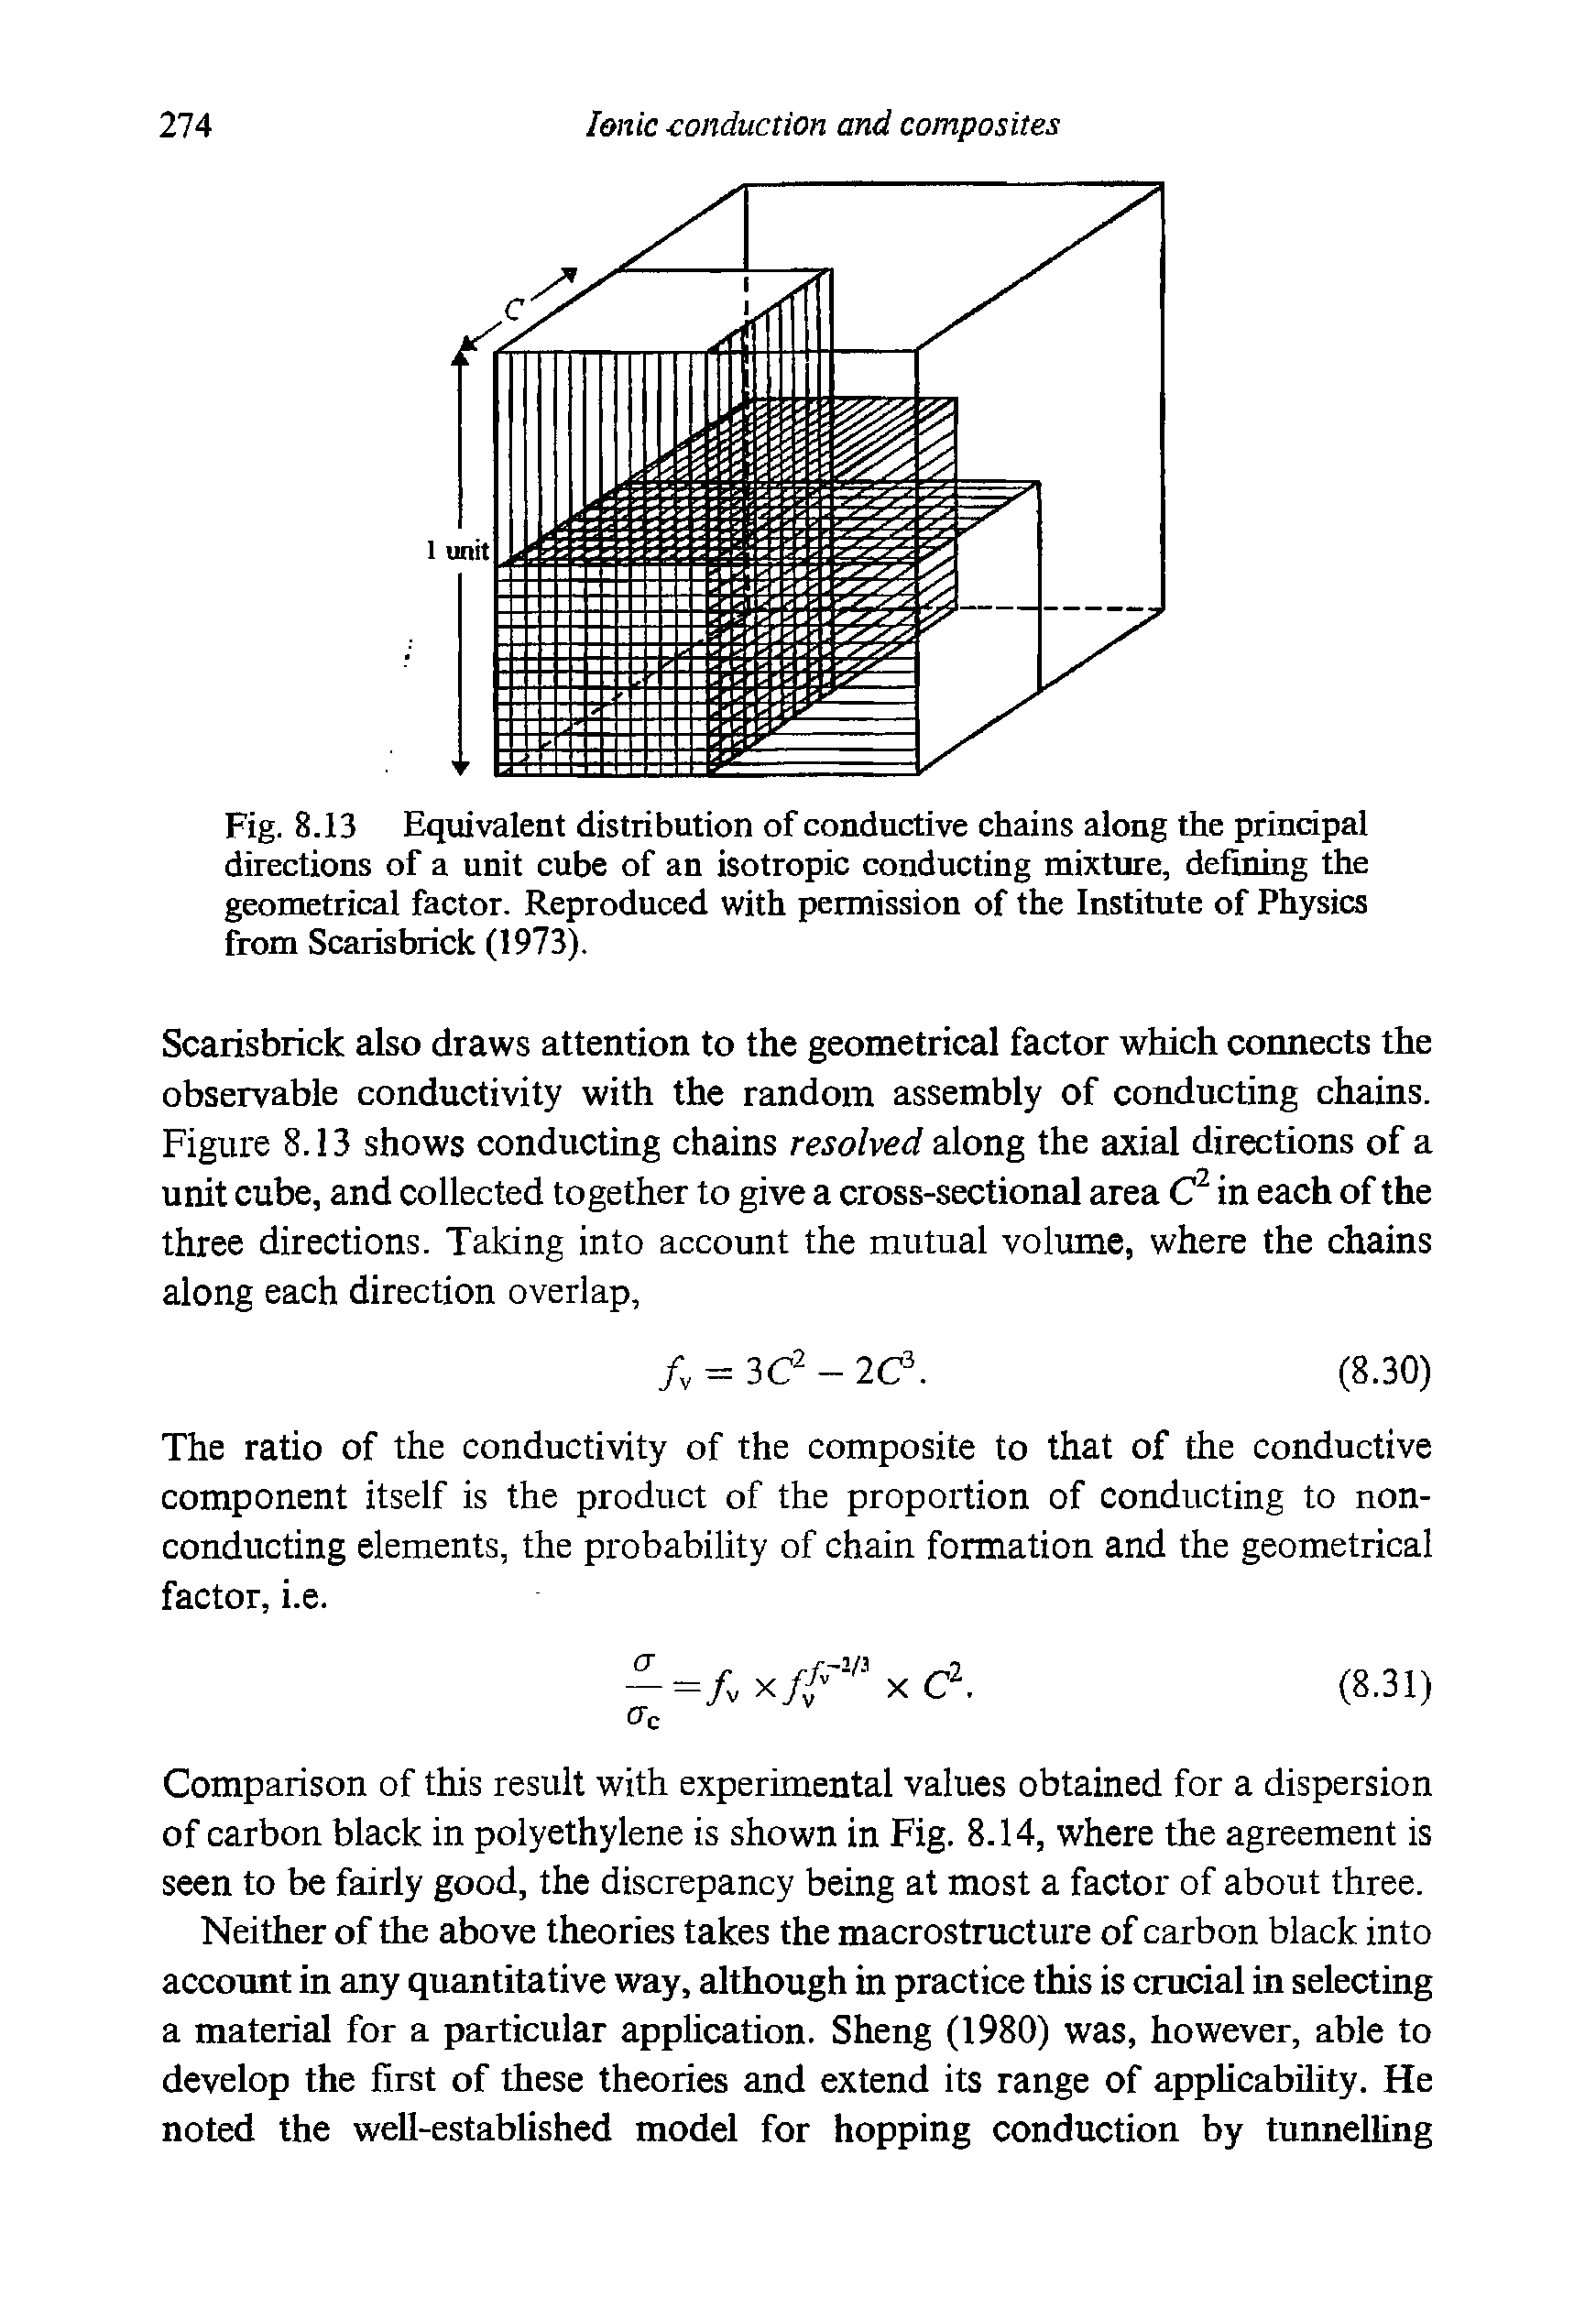 Fig. 8.13 Equivalent distribution of conductive chains along the principal directions of a unit cube of an isotropic conducting mixture, defining the geometrical factor. Reproduced with permission of the Institute of Physics from Scarisbrick (1973).